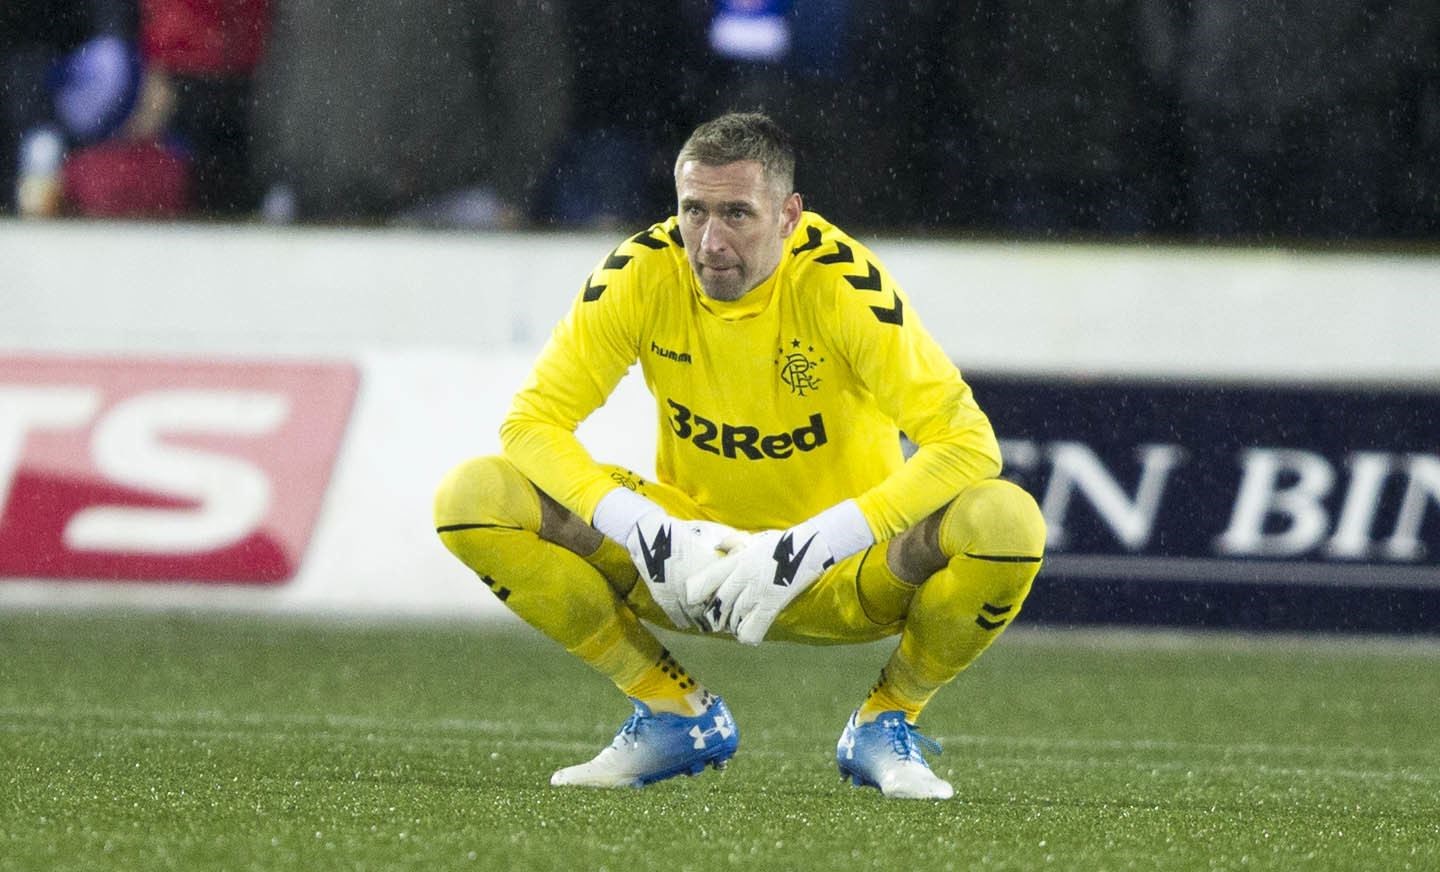 Rangers goalkeeper Allan McGregor has not spoken publicly about the car fire outside his home (Andrew Milligan/PA)